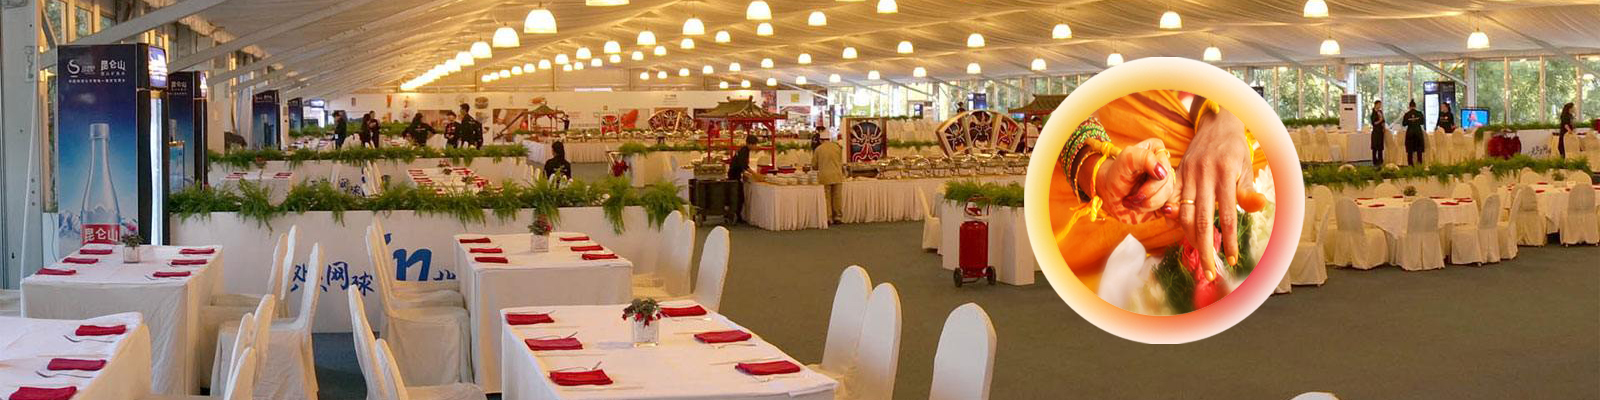 Wedding/Marriage Caterers in Bangalore